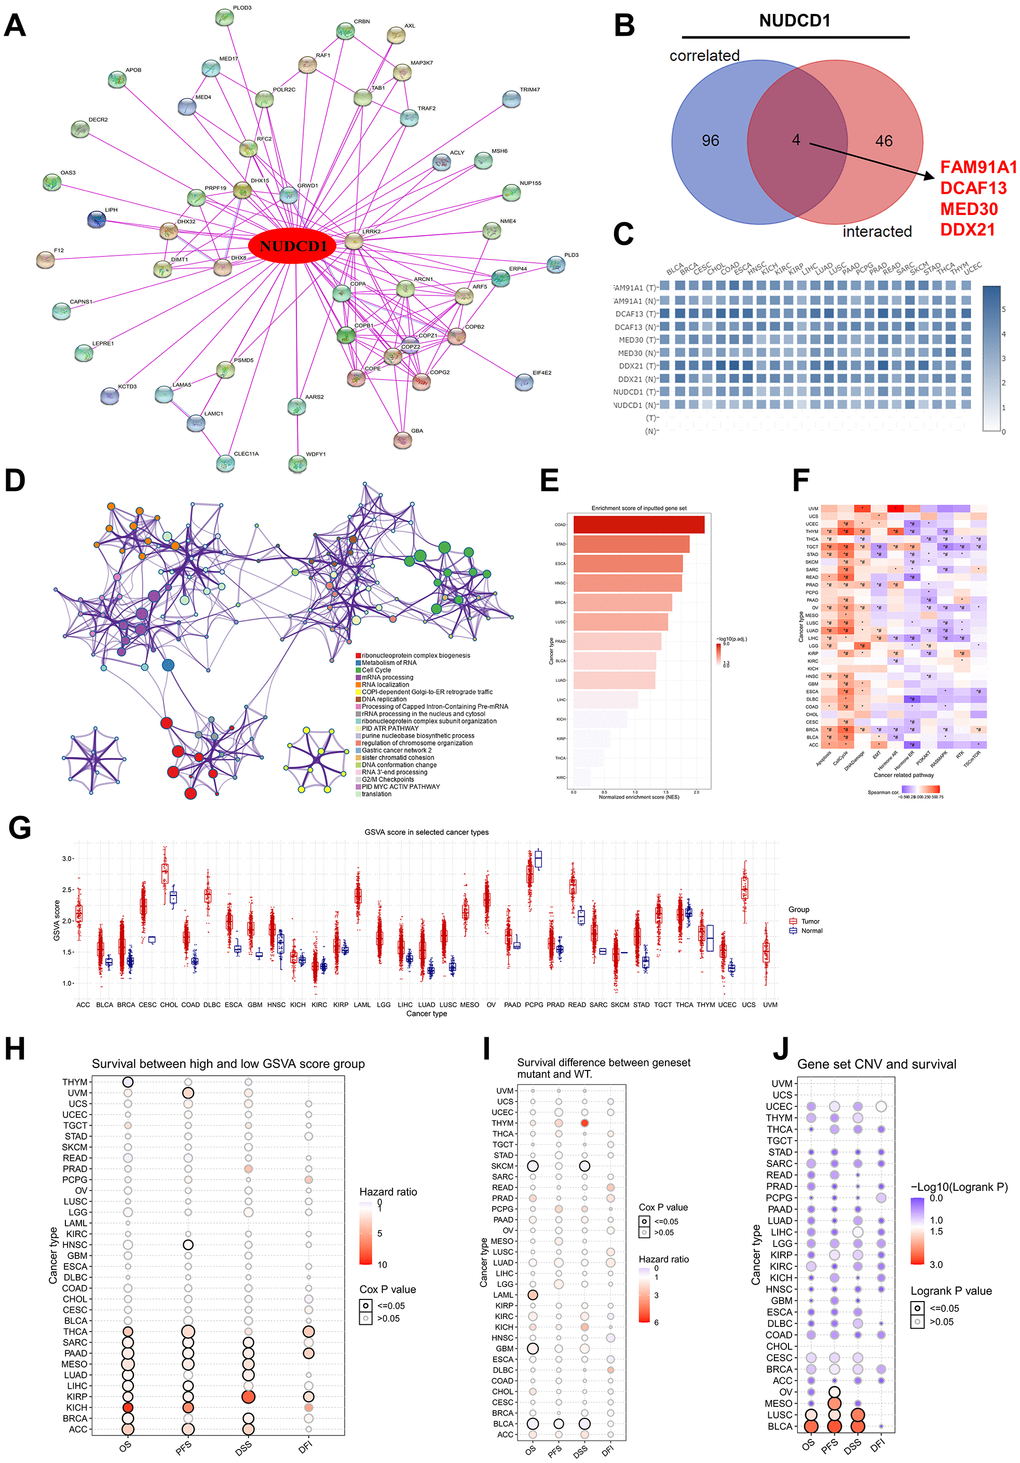 Enrichment analysis of NUDCD1-related partners. (A) NUDCD1-interacting proteins identified using STRING. (B) Wayne diagrams of intersection analyses of NUDCD1-correlated and inter-acting genes (data from GEPIA2 and STRING). (C) Corresponding heat maps of 4 NUDCD1-related genes in specific cancer types (data from GEPIA2). (D) Pathway and process enrichment analysis of 146 NUDCD1-related genes; a subset of enriched terms was selected and rendered as a network plot as indicated. (E) Enrichment scores for NUDCD1-related genes in the detailed cancers (data from GSCA). (F) Associations between GSVA score and activity of cancer related pathways (data from GSCA). (G) GSVA scores of NUDCD1-related genes in the detailed cancer types. (H) Survival differences between high and low GSVA score groups in multiple cancers (data from GSCA). (I) Survival differences between NUDCD1-related gene set mutant and WT (data from GSCA). (J) Survival differences between NUDCD1-related gene set CNV groups (amplification, deletion and WT) from GSCA database.